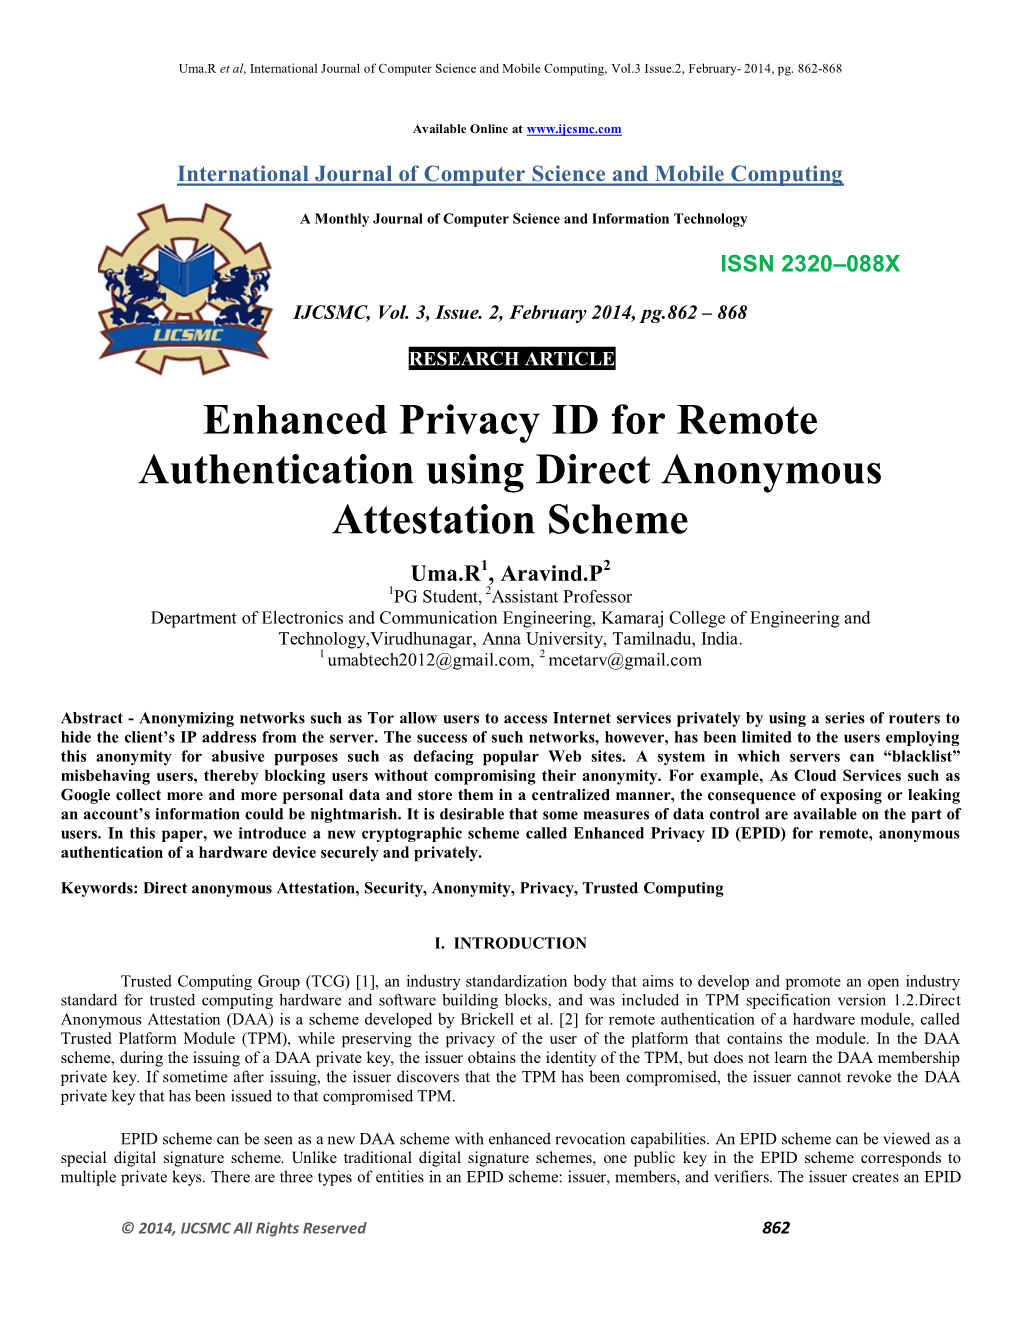 Enhanced Privacy ID for Remote Authentication Using Direct